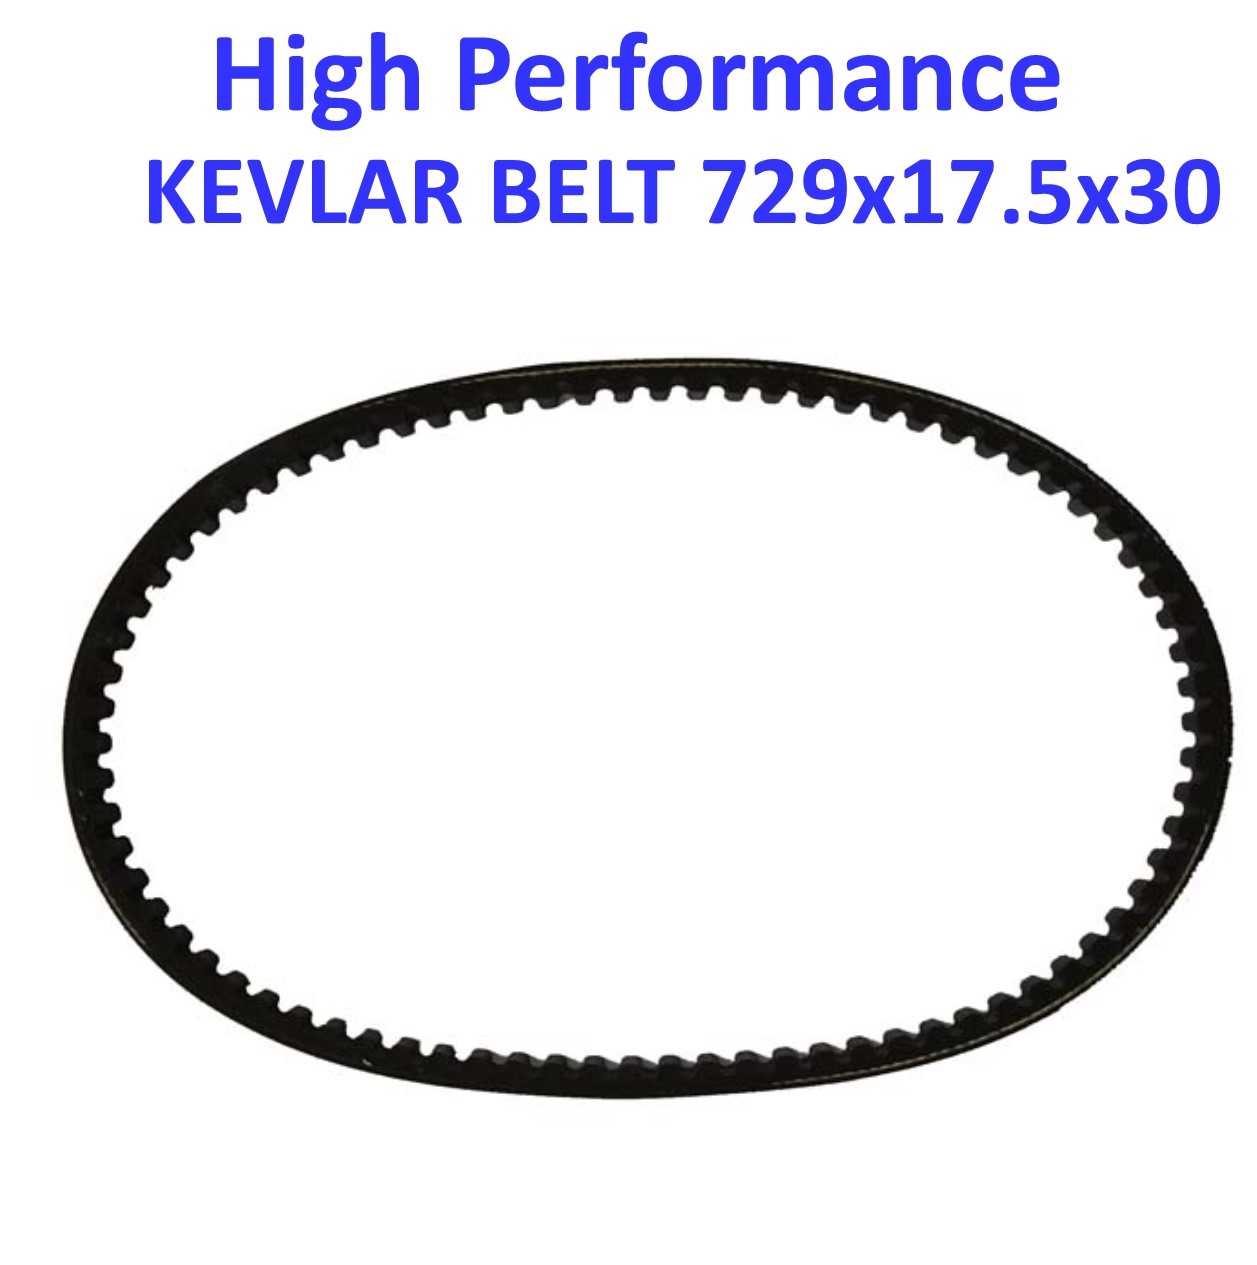 Belt 729x17.5x30 Kevlar Fits Many Chinese GY6 49-150cc ATVs, GoKarts, and 4 stroke Scooters With 12 & 13" Wheels